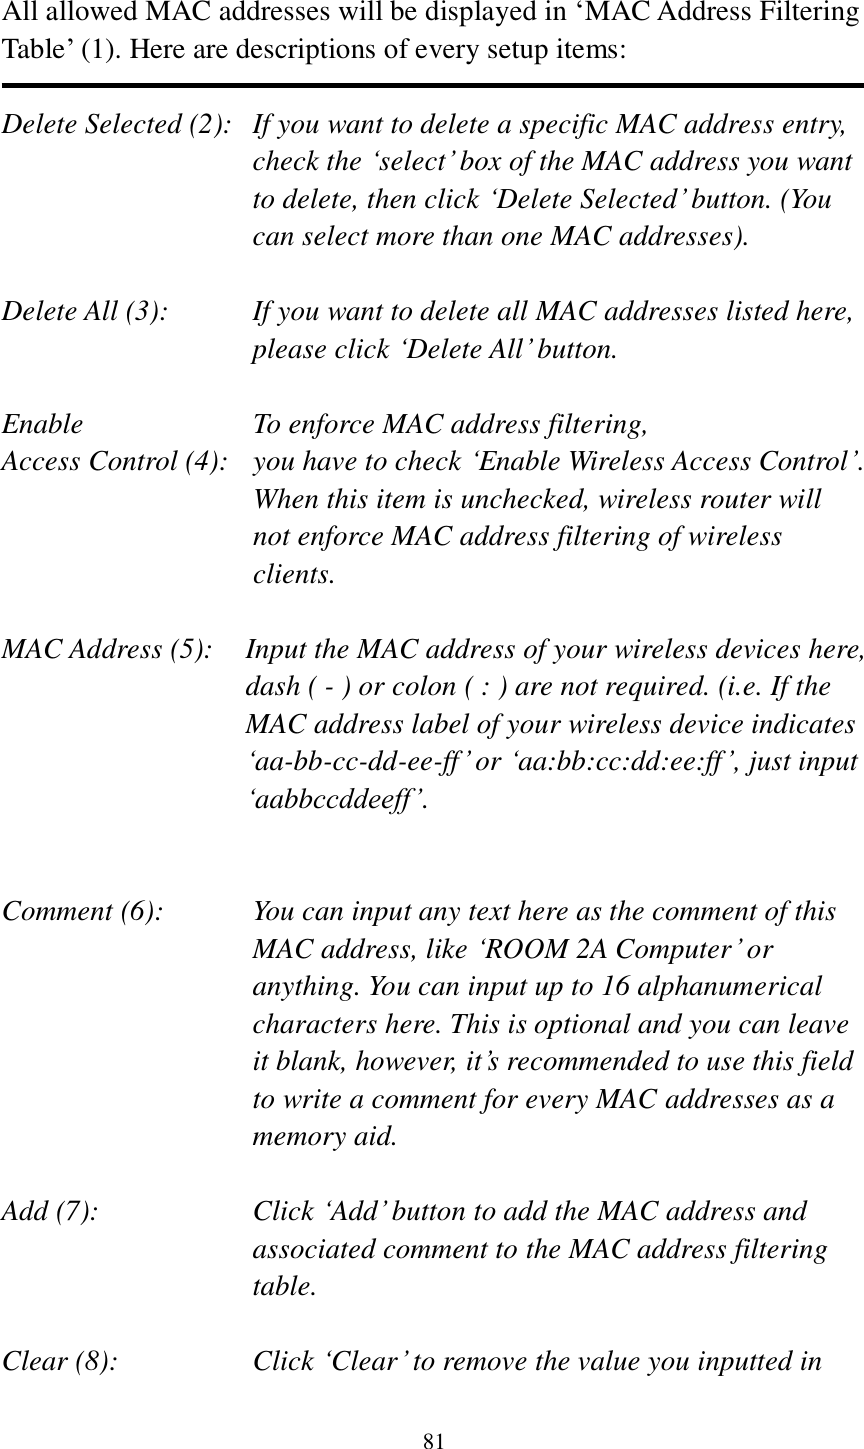 81  All allowed MAC addresses will be displayed in „MAC Address Filtering Table‟ (1). Here are descriptions of every setup items:  Delete Selected (2):   If you want to delete a specific MAC address entry, check the „select‟ box of the MAC address you want to delete, then click „Delete Selected‟ button. (You can select more than one MAC addresses).  Delete All (3):    If you want to delete all MAC addresses listed here, please click „Delete All‟ button.  Enable      To enforce MAC address filtering, Access Control (4):   you have to check „Enable Wireless Access Control‟. When this item is unchecked, wireless router will not enforce MAC address filtering of wireless clients.  MAC Address (5):    Input the MAC address of your wireless devices here, dash ( - ) or colon ( : ) are not required. (i.e. If the MAC address label of your wireless device indicates „aa-bb-cc-dd-ee-ff‟ or „aa:bb:cc:dd:ee:ff‟, just input „aabbccddeeff‟.   Comment (6):      You can input any text here as the comment of this       MAC address, like „ROOM 2A Computer‟ or         anything. You can input up to 16 alphanumerical   characters here. This is optional and you can leave   it blank, however, it‟s recommended to use this field   to write a comment for every MAC addresses as a   memory aid.  Add (7):    Click „Add‟ button to add the MAC address and associated comment to the MAC address filtering table.  Clear (8):    Click „Clear‟ to remove the value you inputted in 